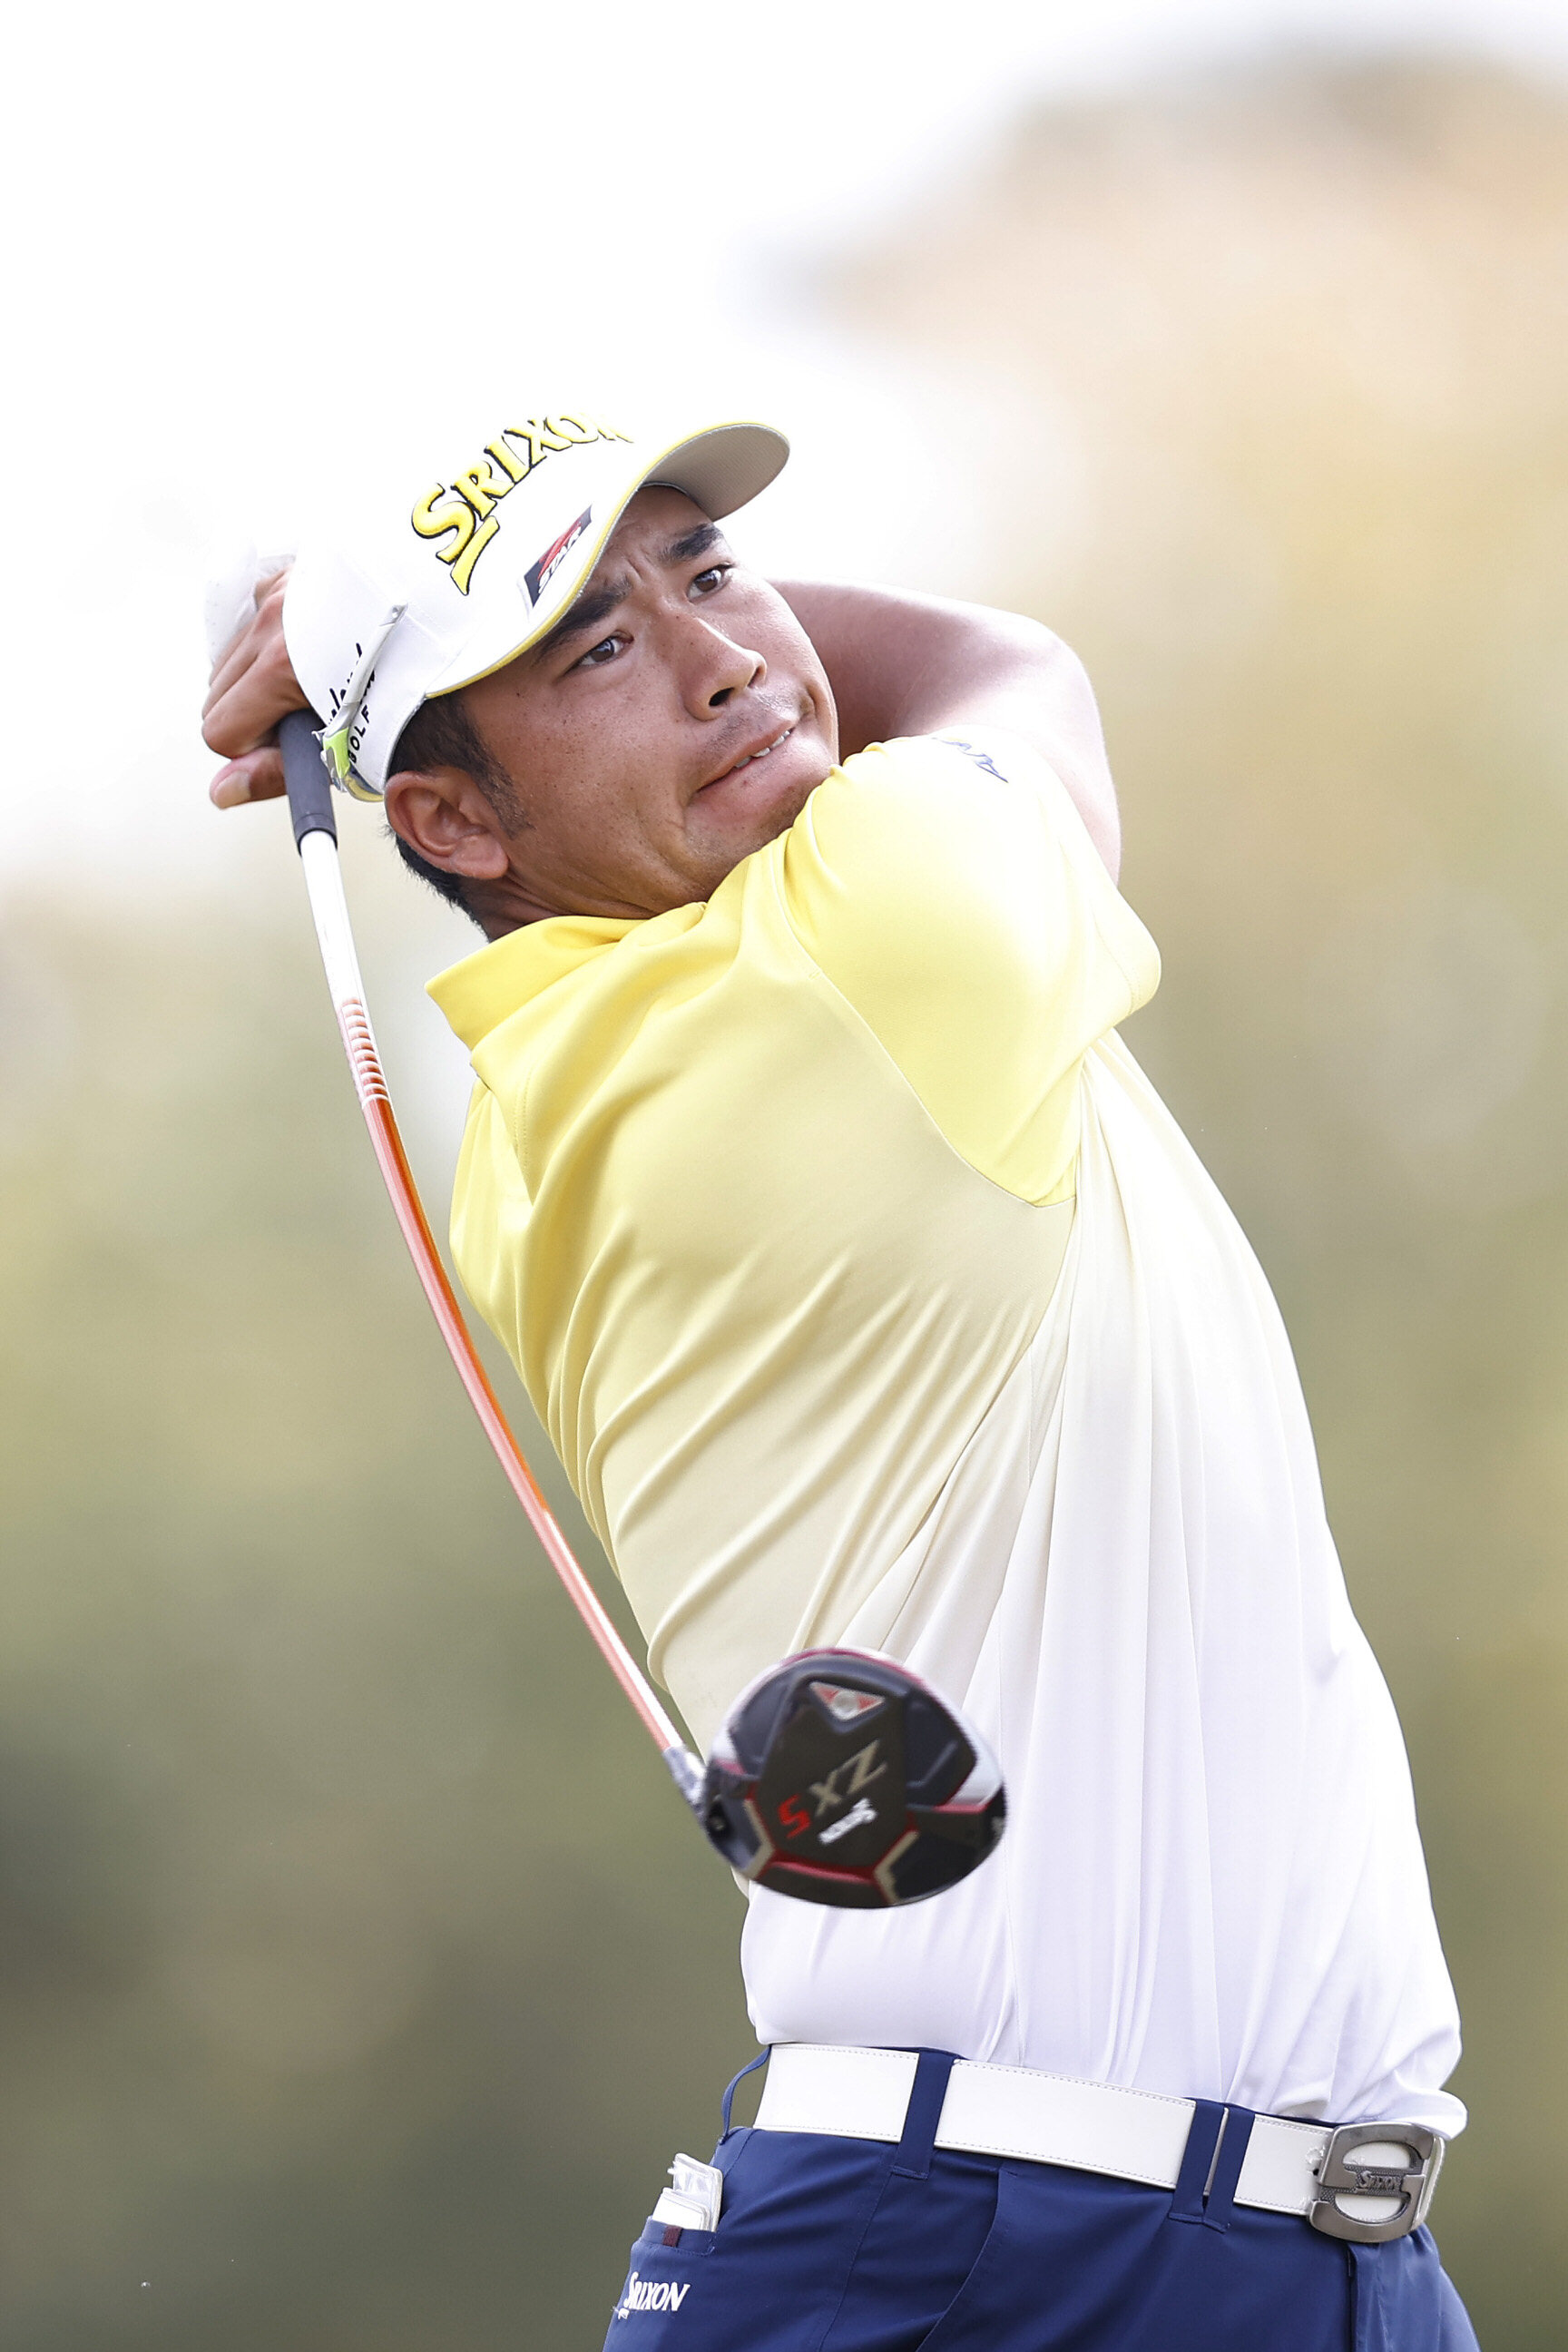  HOUSTON, TEXAS - NOVEMBER 08: Hideki Matsuyama of Japan plays his shot from the tenth tee during the final round of the Houston Open at Memorial Park Golf Course on November 08, 2020 in Houston, Texas. (Photo by Carmen Mandato/Getty Images) 